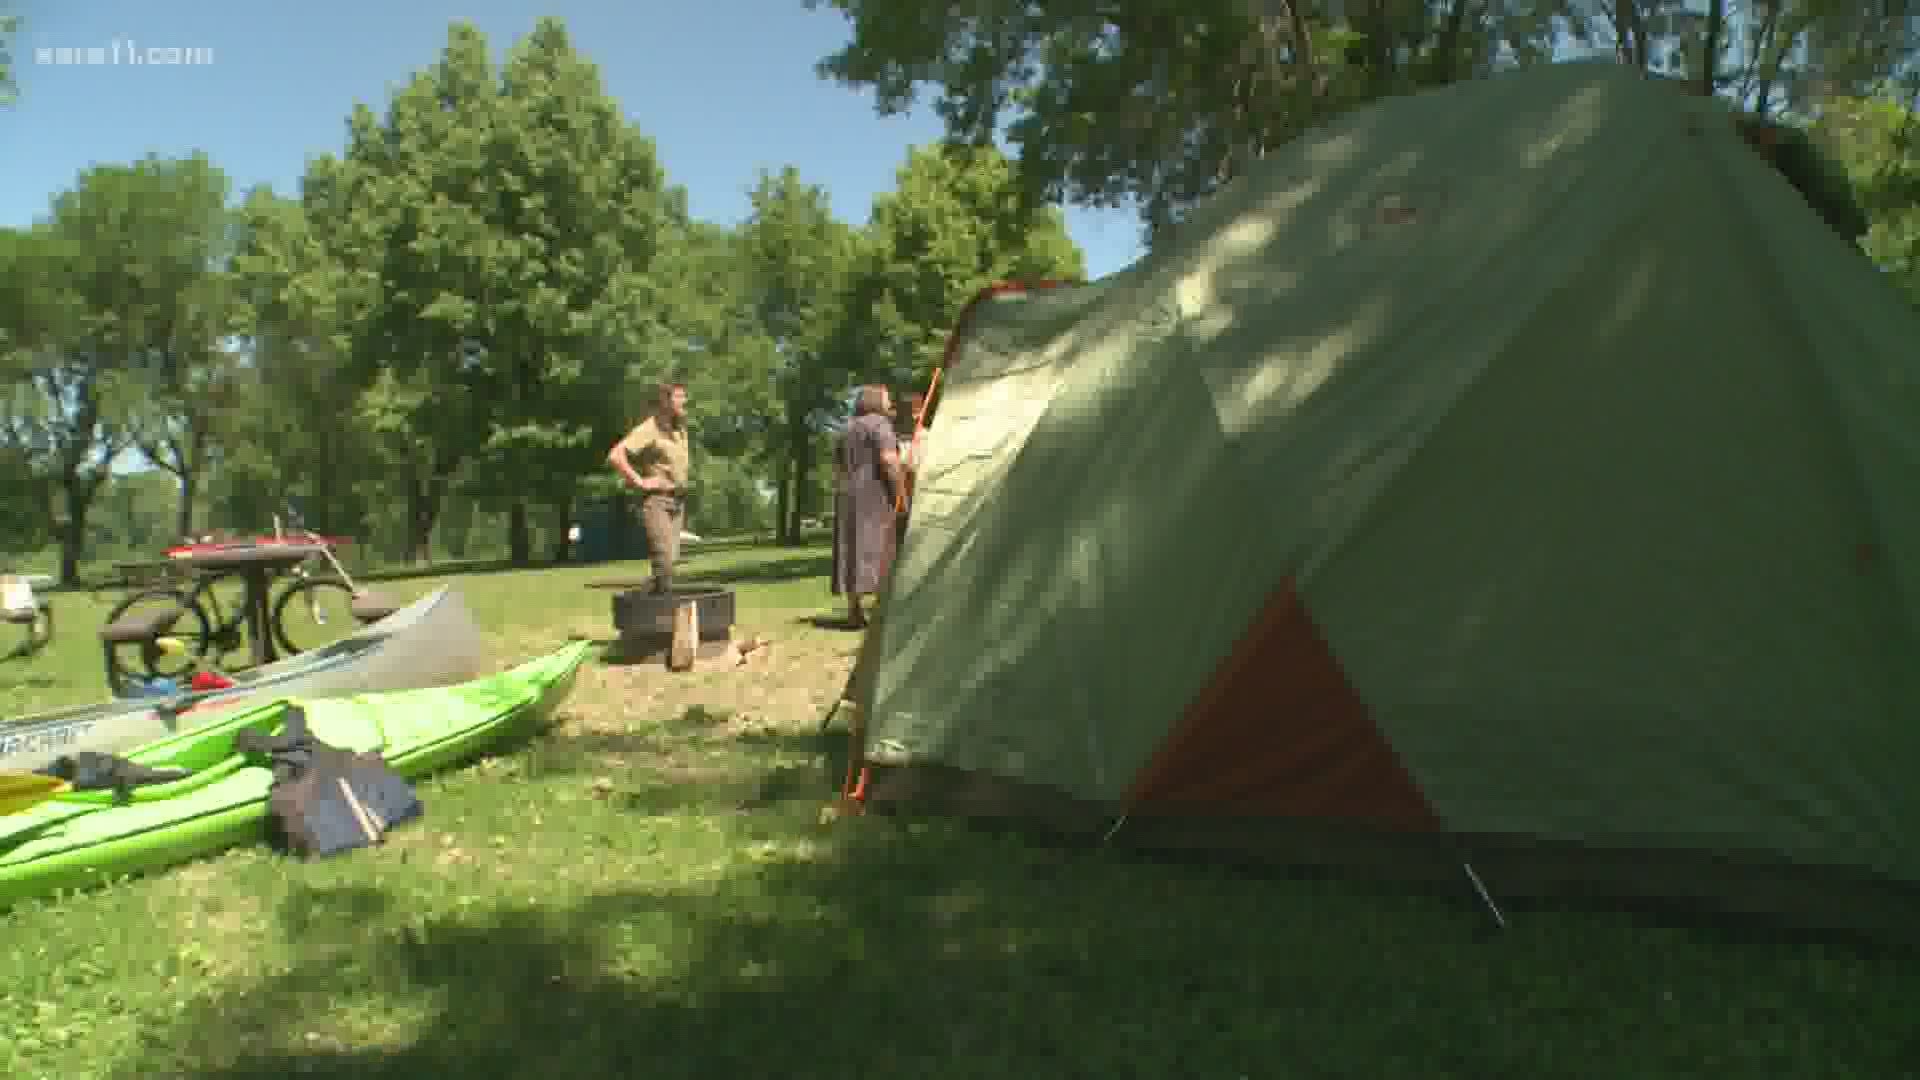 Only about 100 of Minnesota's 5,000 state park campsites are still available during 4th of July weekend